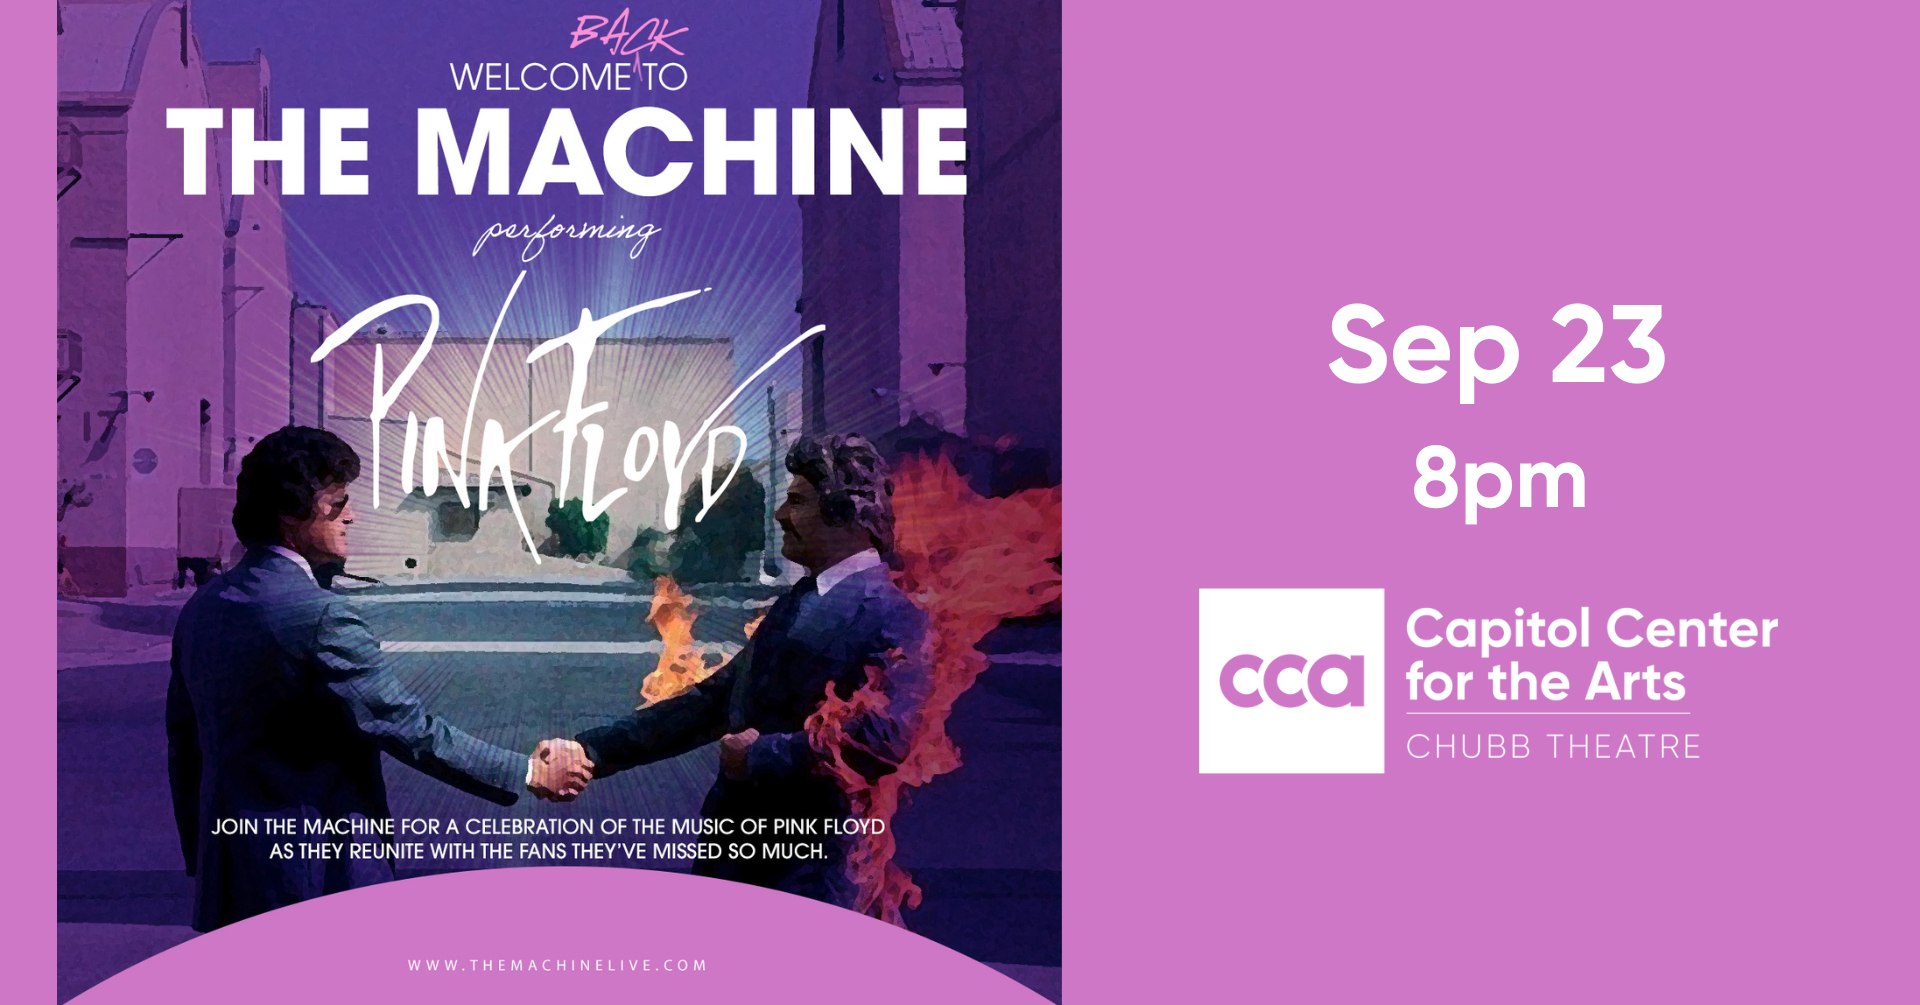 Win Tickets to See The Machine Performing Pink Floyd at Capitol Center For the Arts